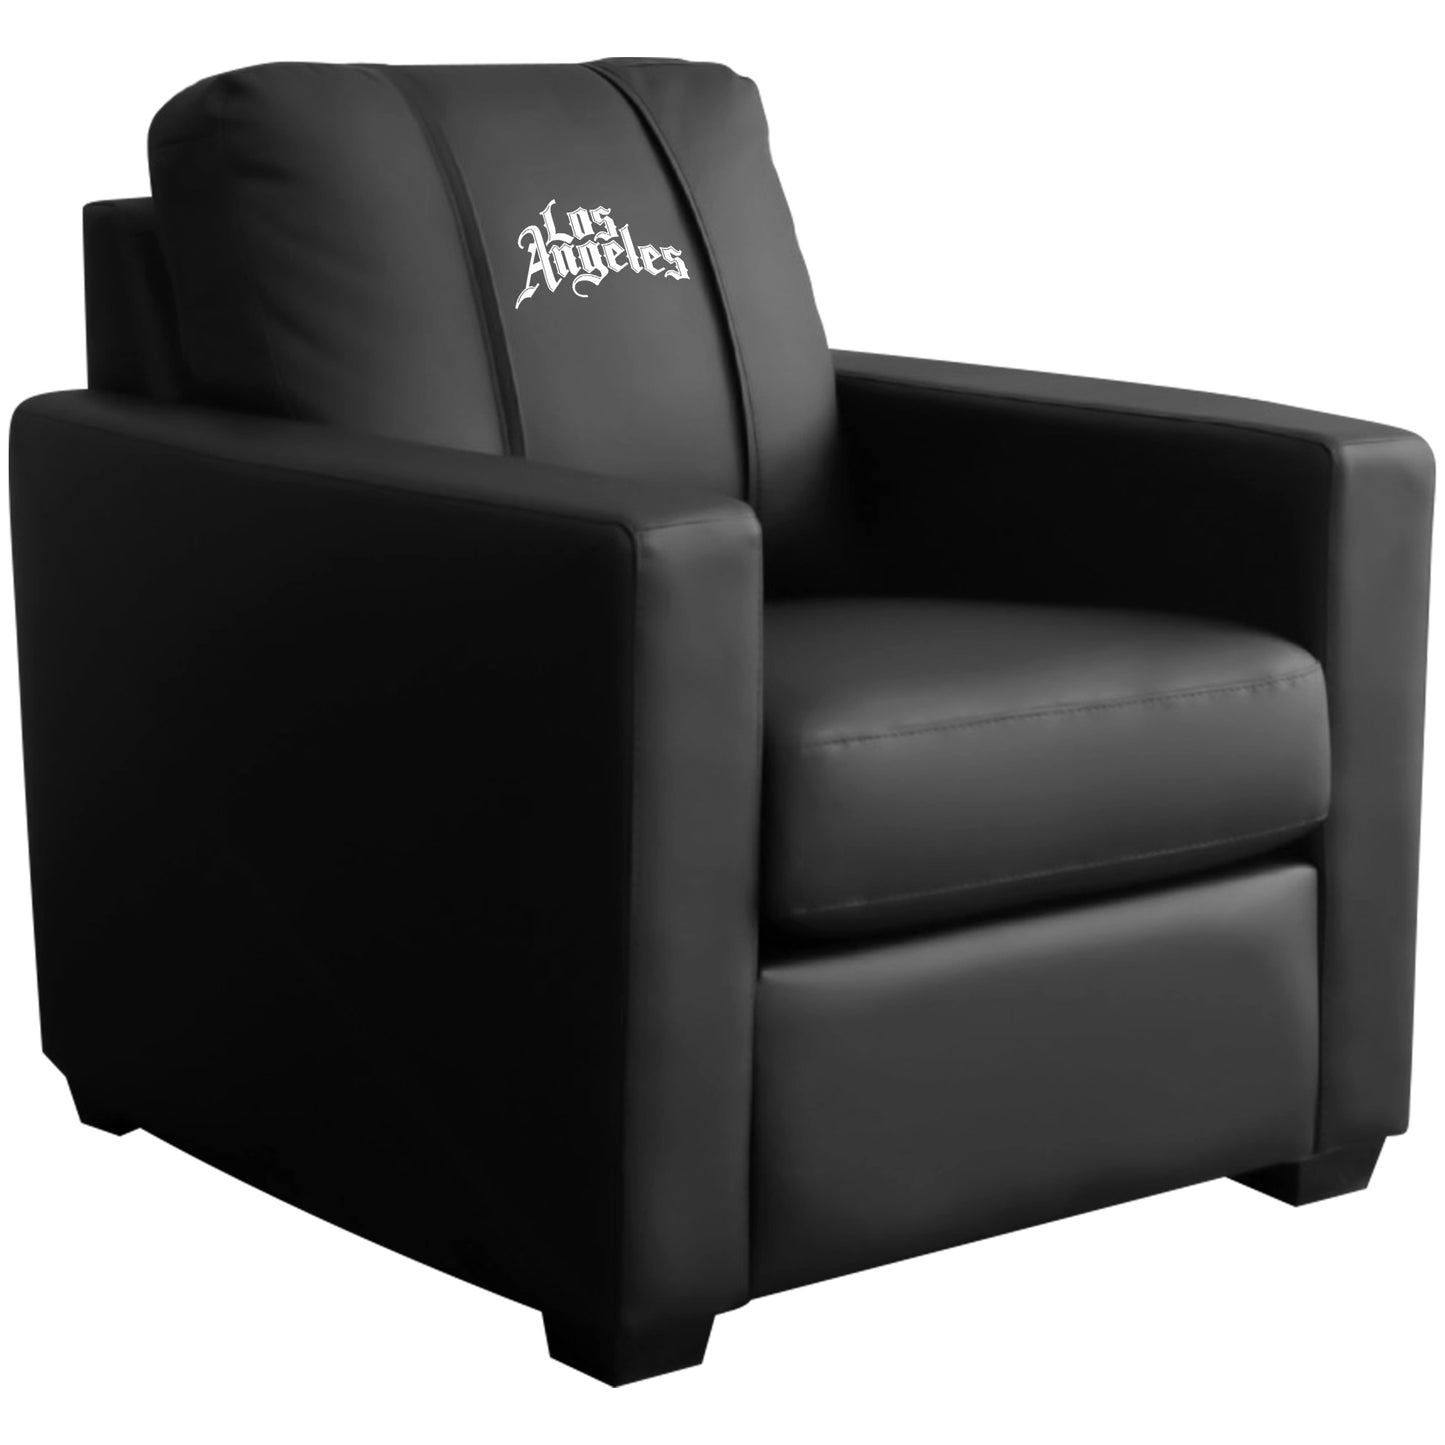 Silver Club Chair with Los Angeles Clippers Alternate Logo